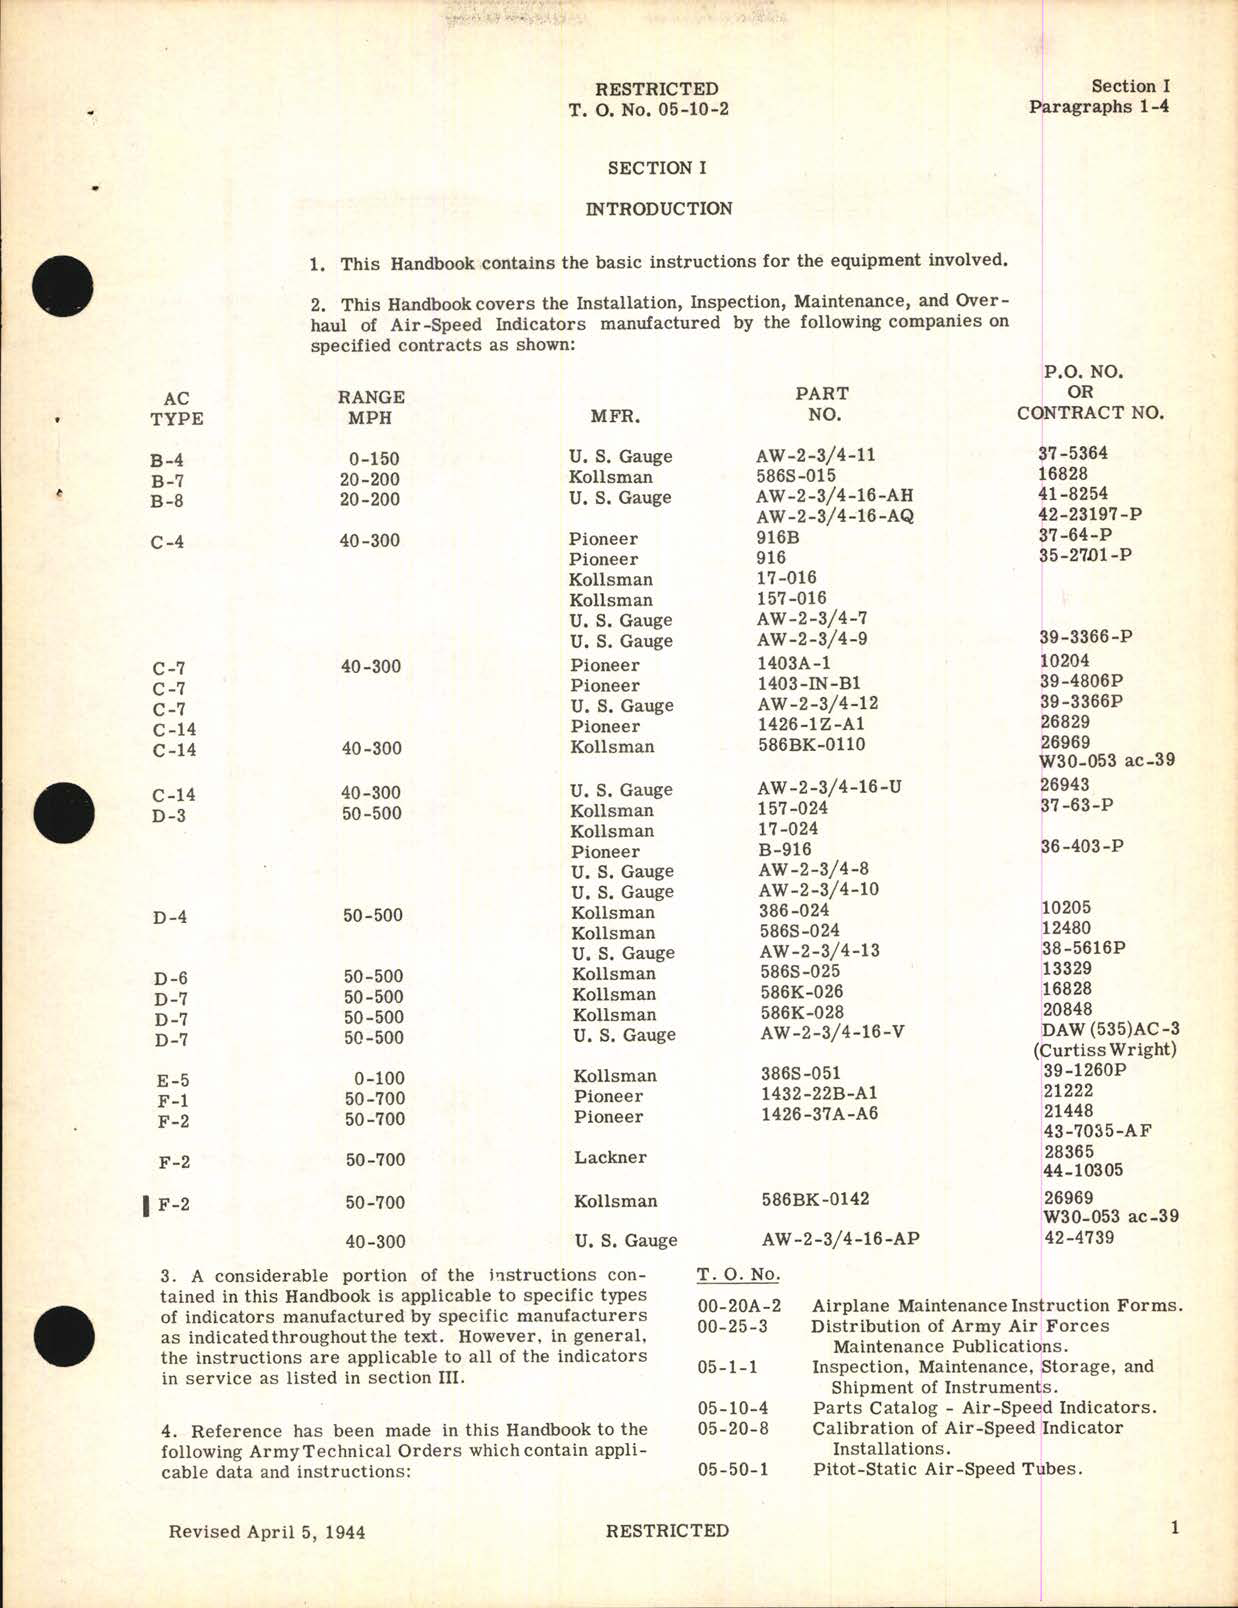 Sample page 5 from AirCorps Library document: Handbook of Instructions for Air-Speed Indicators